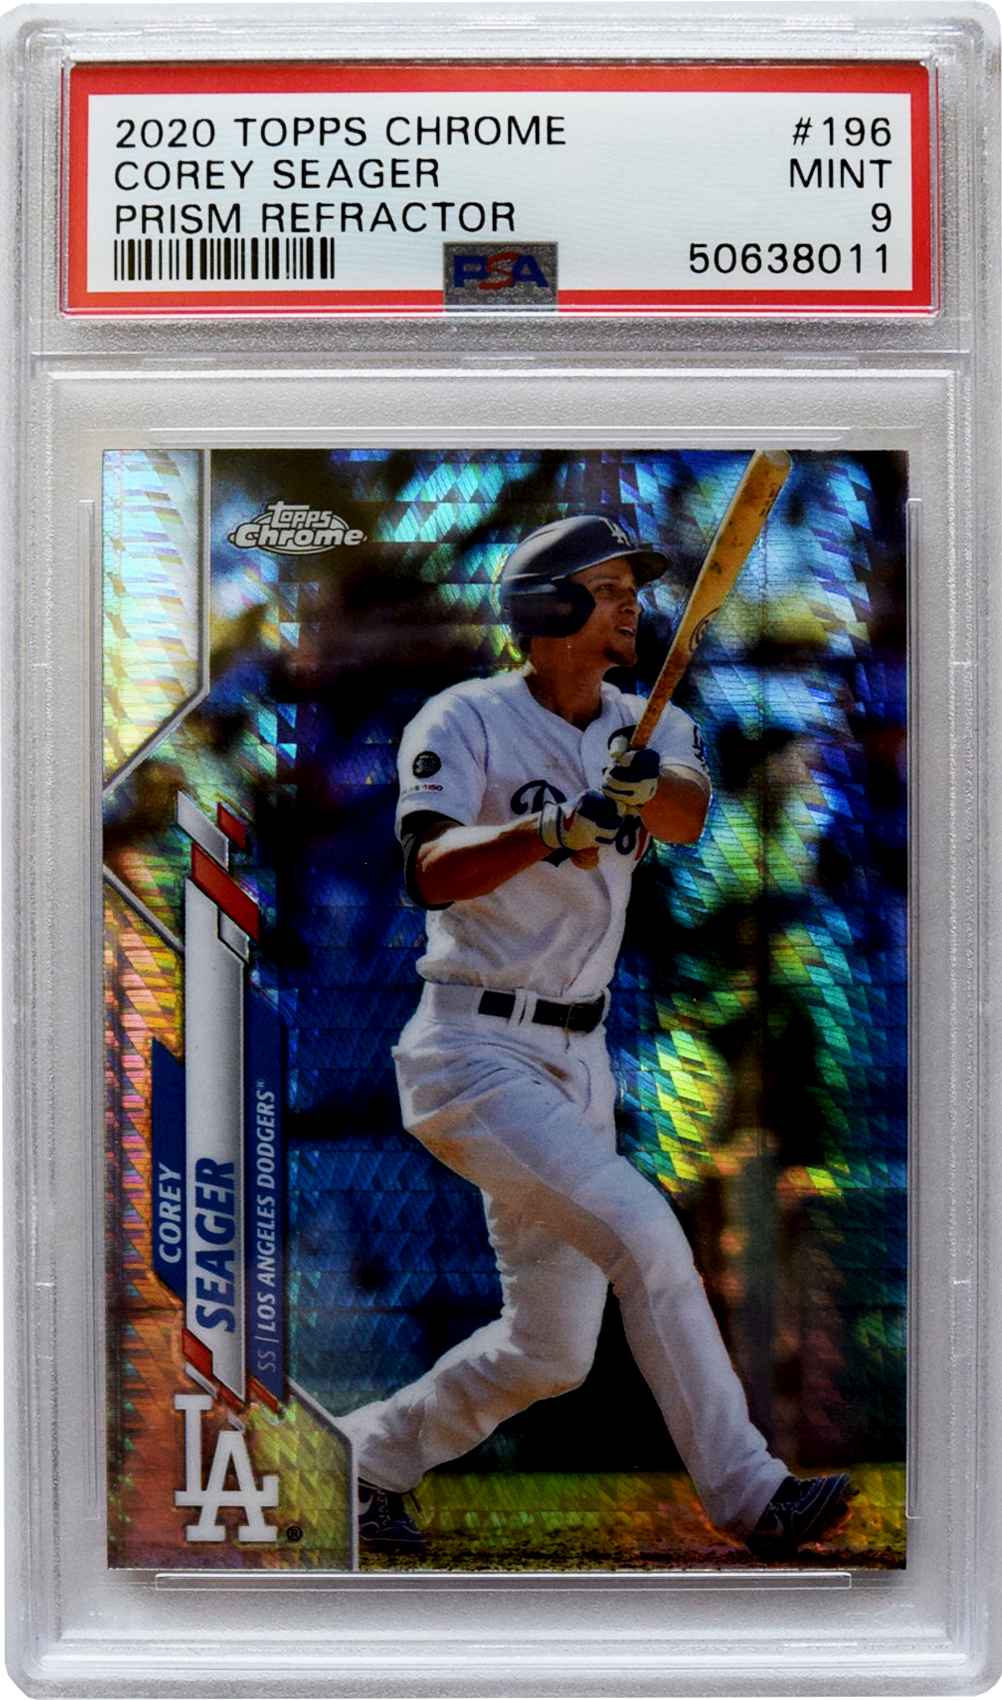 Topps 2020 | Chrome | #196 Corey Seager Prism Refractor PSA 9 MINT